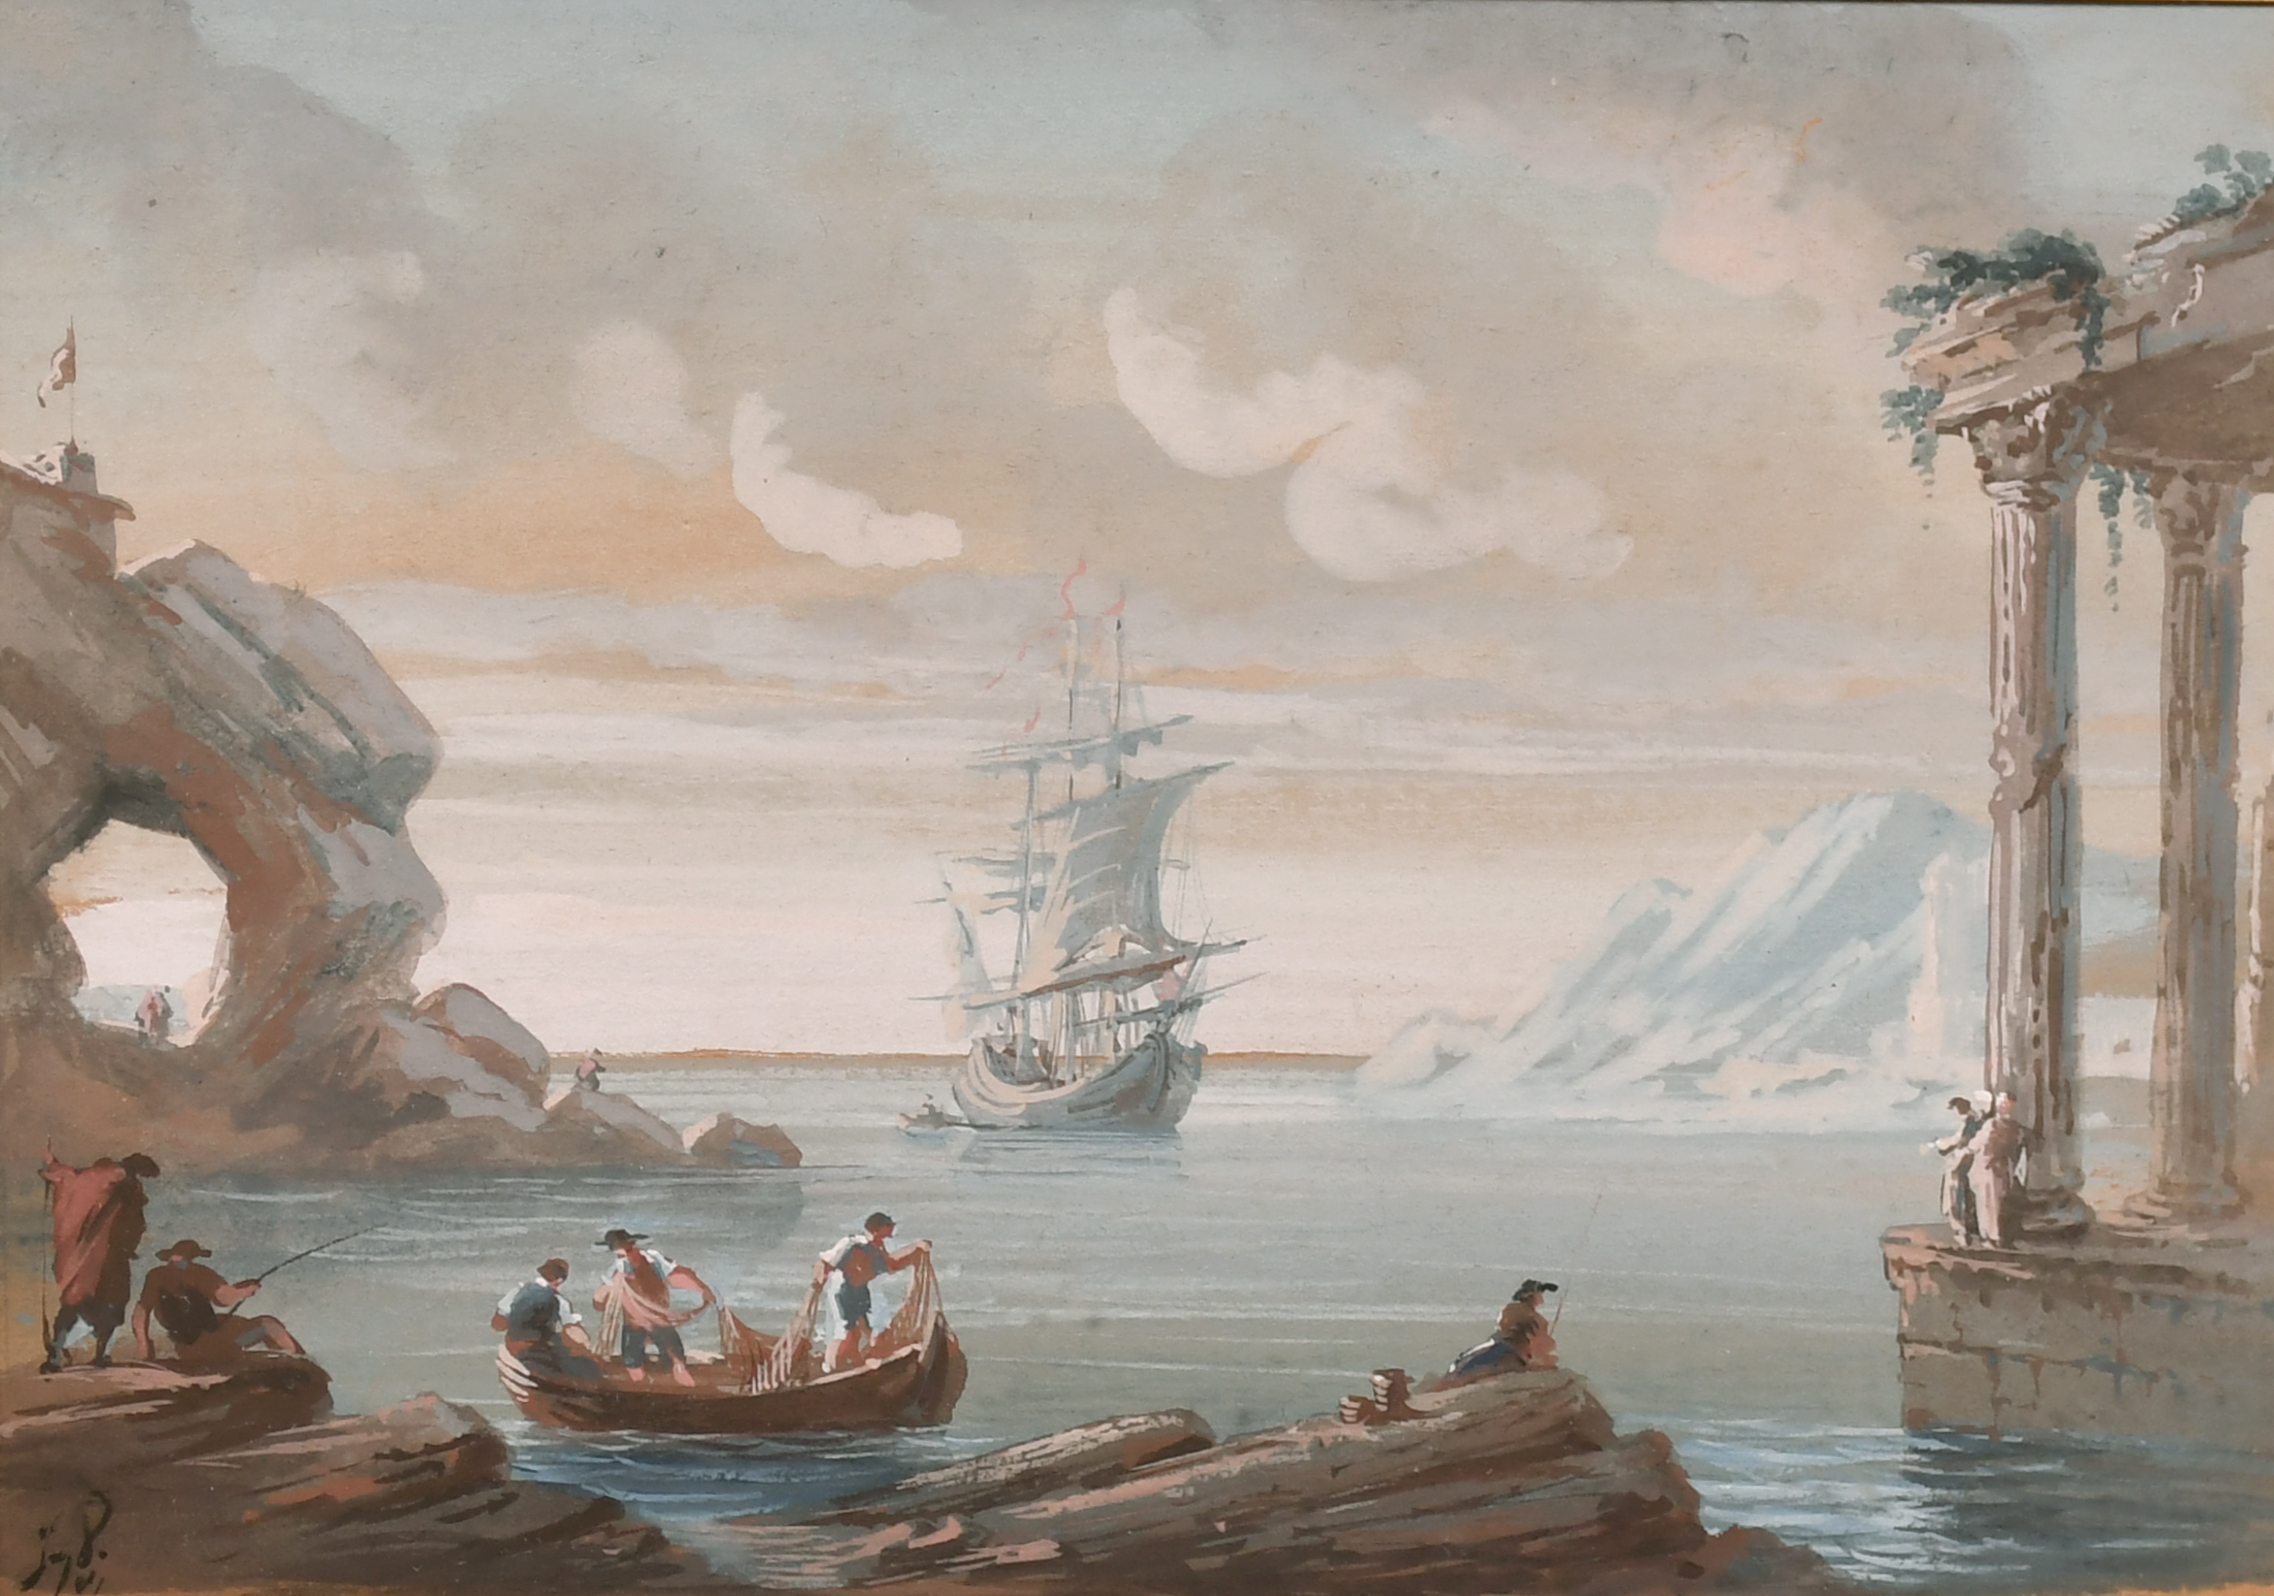 Early 19th Century European School. Figures in a Boat by Classical Ruins with a Ship beyond,